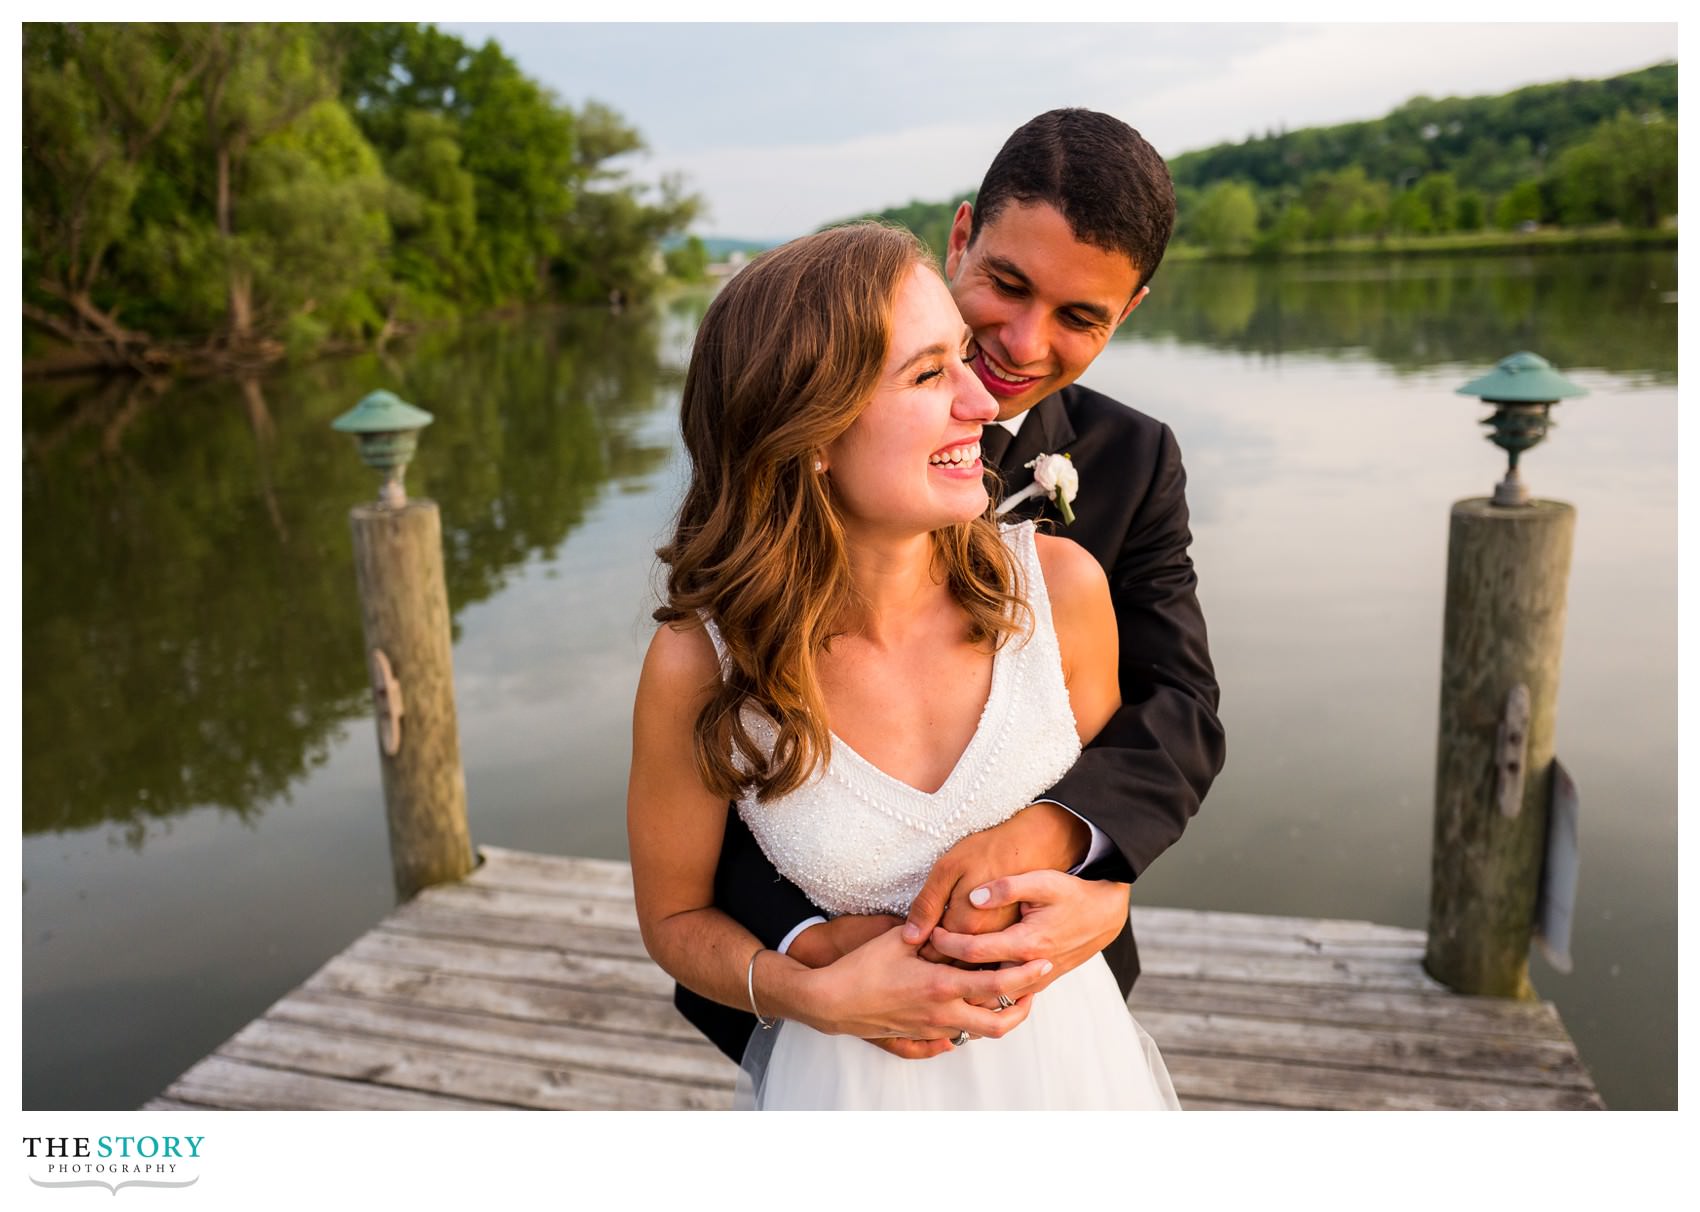 Candid wedding photography in Ithaca, NY